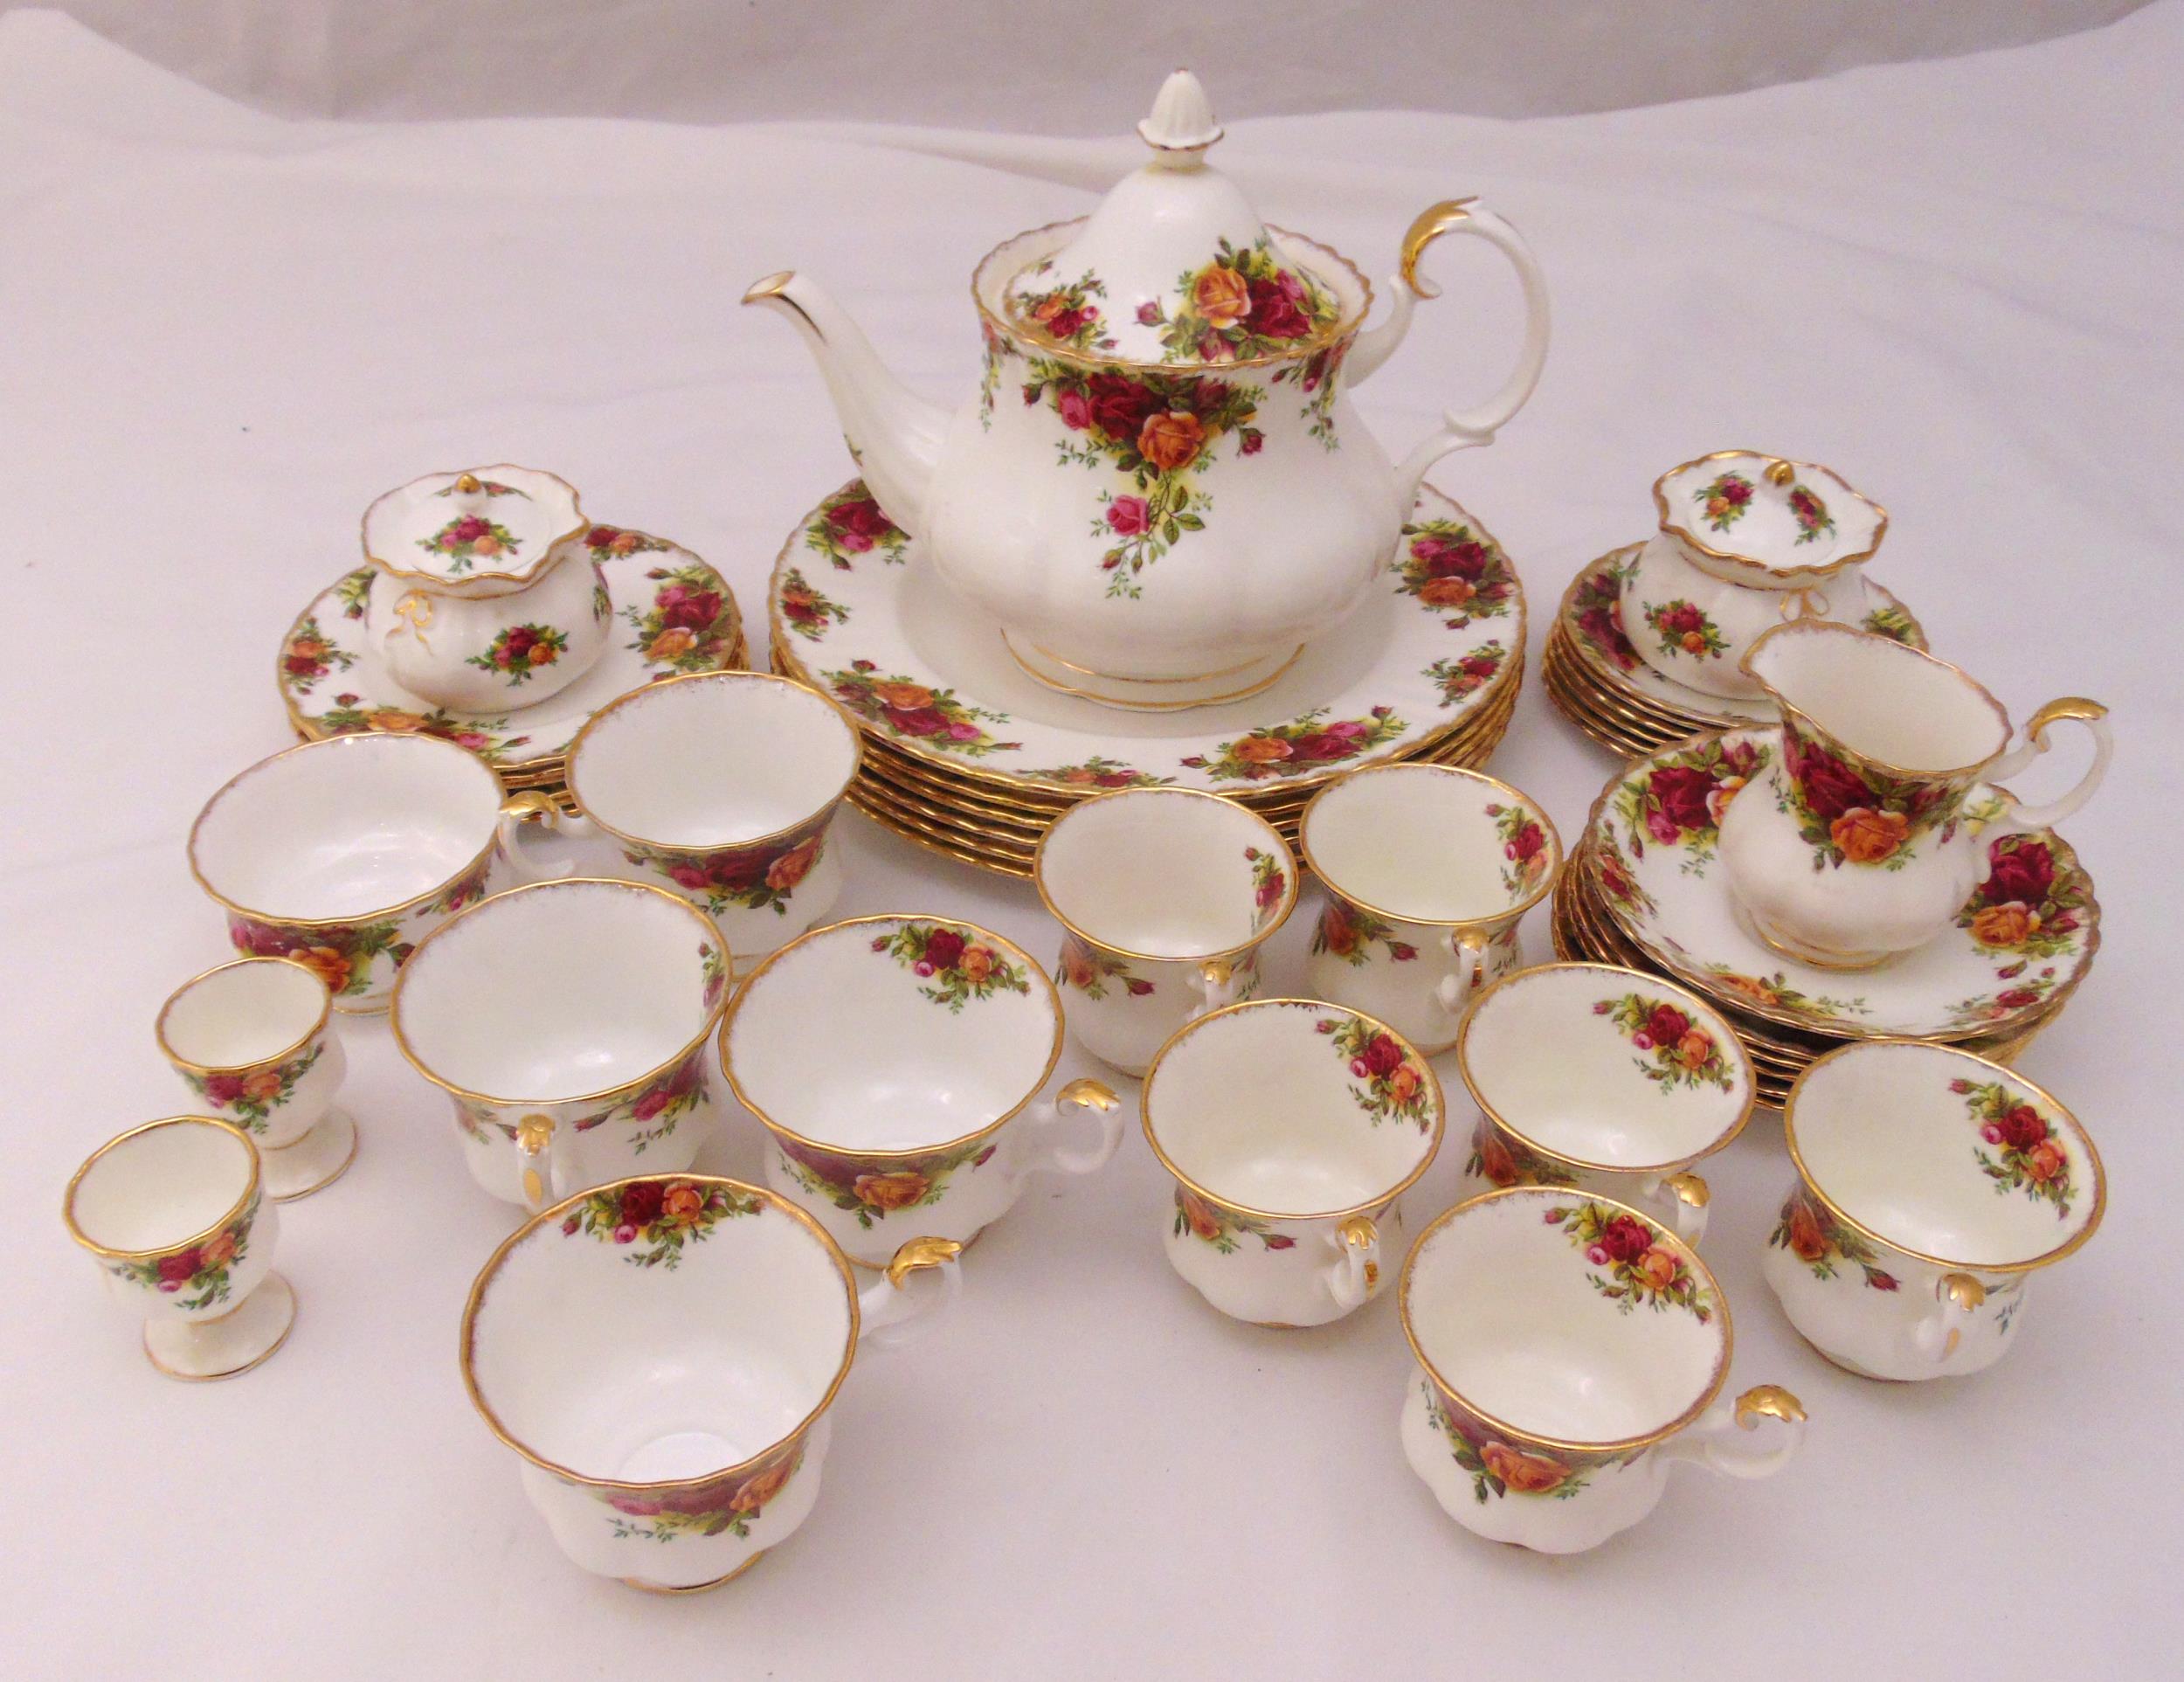 Royal Albert Old Country Roses dinner and teaset to include plates, cups, saucers and a teapot (